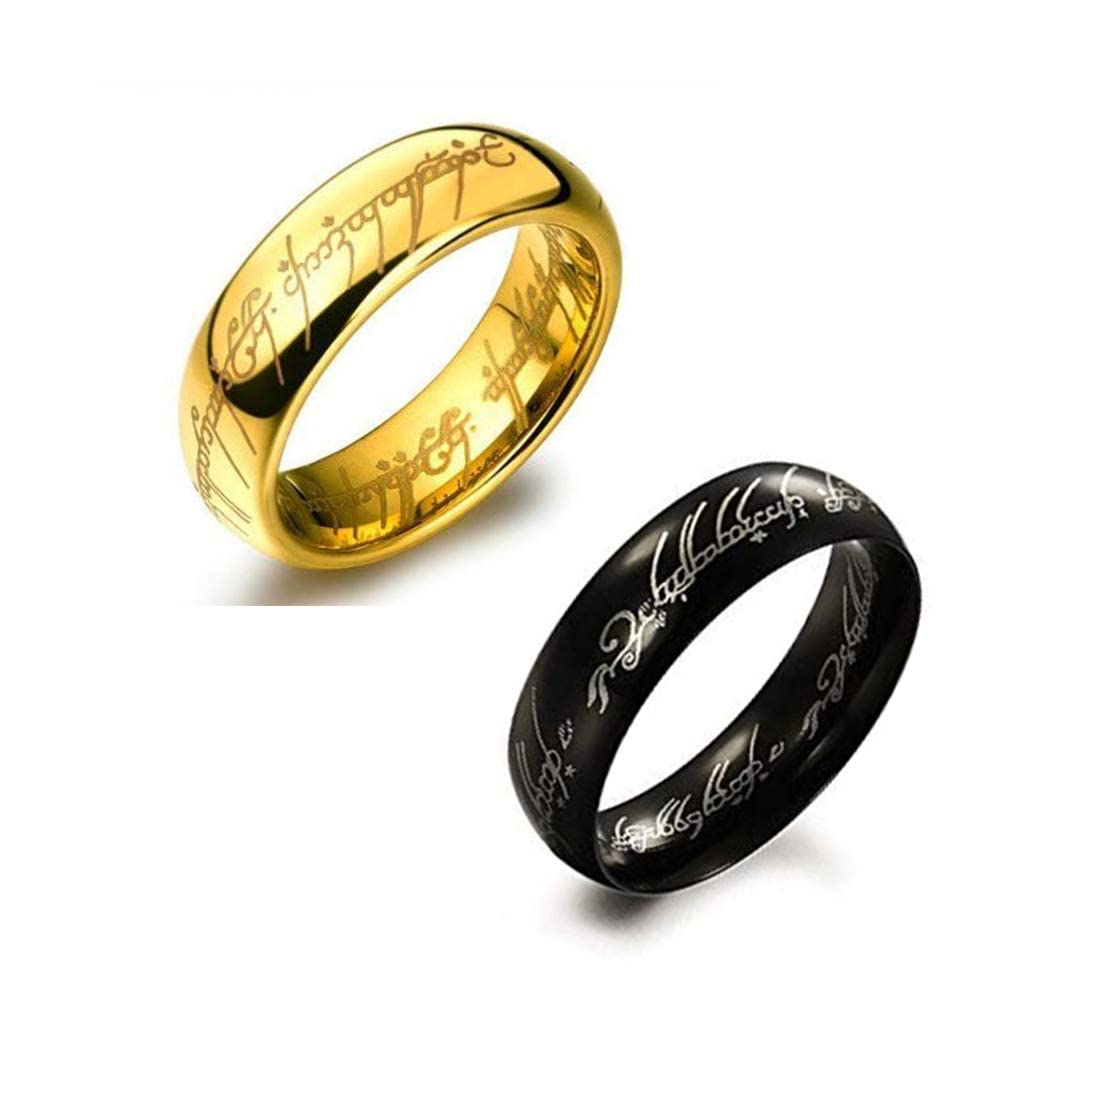 Yellow Chimes Combo Black & Gold Plated Rings For Men | Pack of 2 Stainless Steel Men Rings | Lord of The Rings Design Black & Gold Finger Rings for Boys | Ideal Gift For Men and Boys